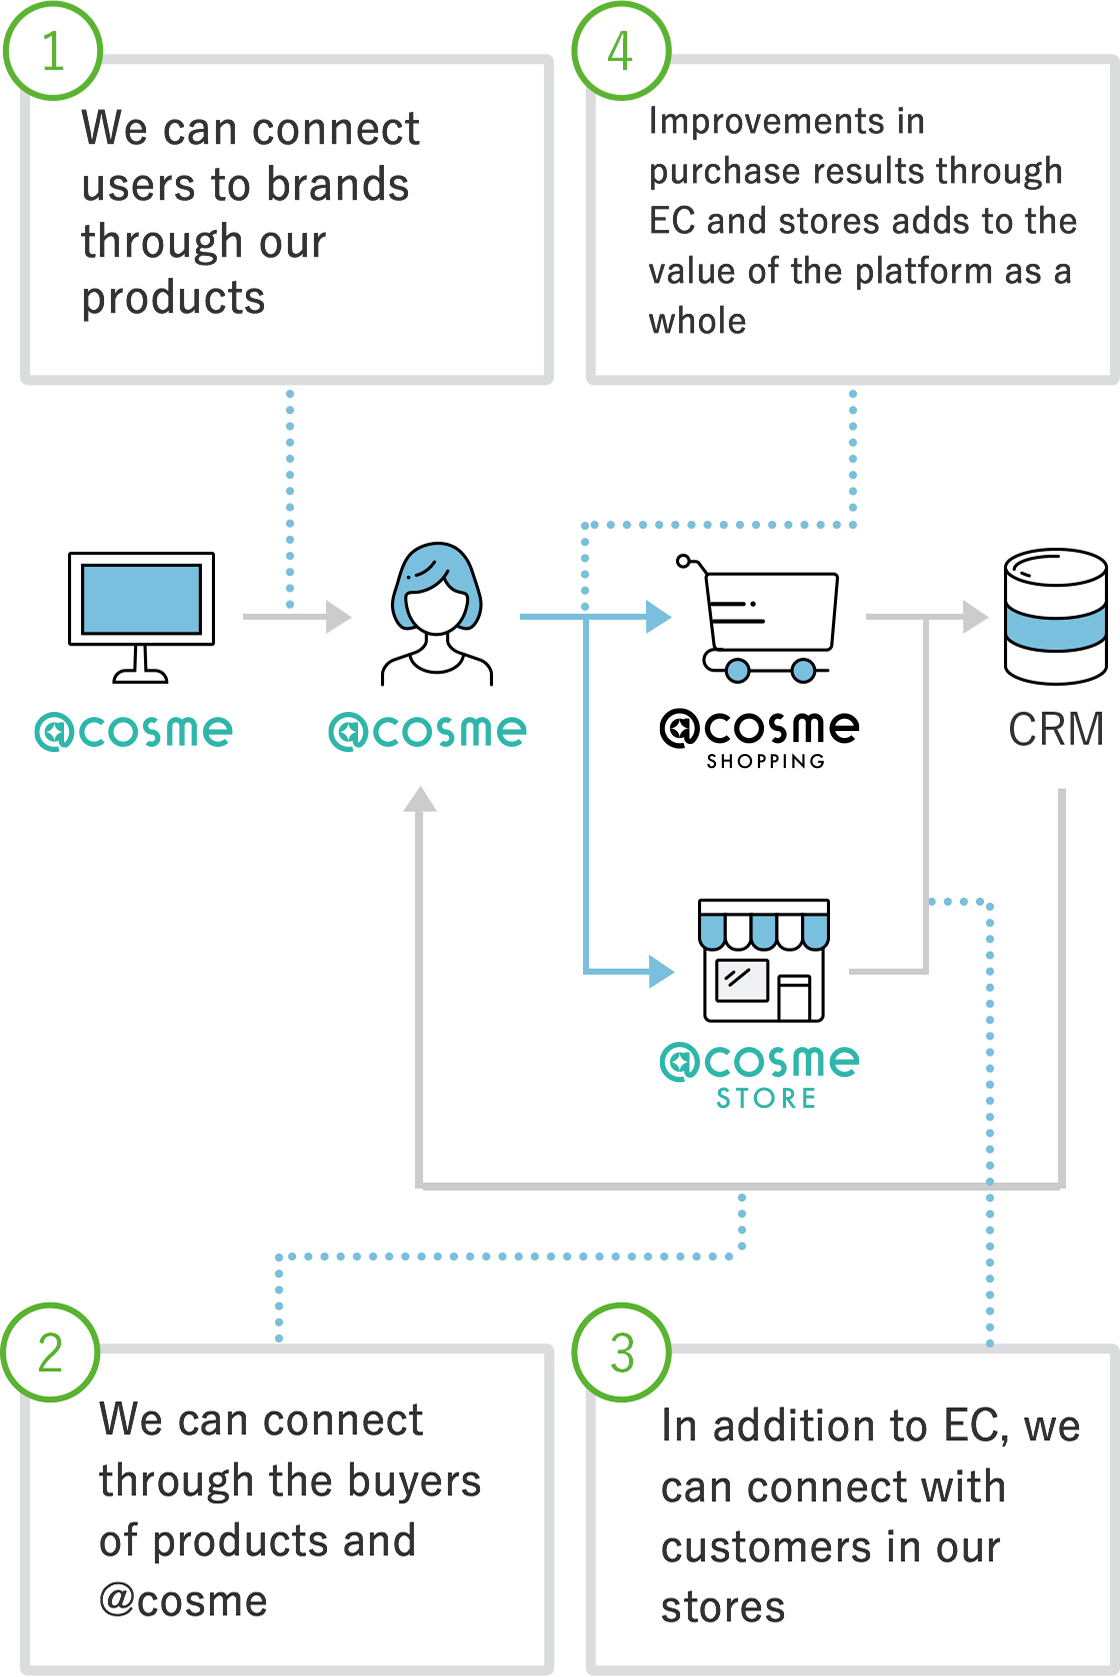 figure：①Connecting between users and brands based on products ②Connecting through customers and @cosme ③Connecting customers in stores in addtion to EC ④Improving value of whole platforms by growing sales result of EC and stores